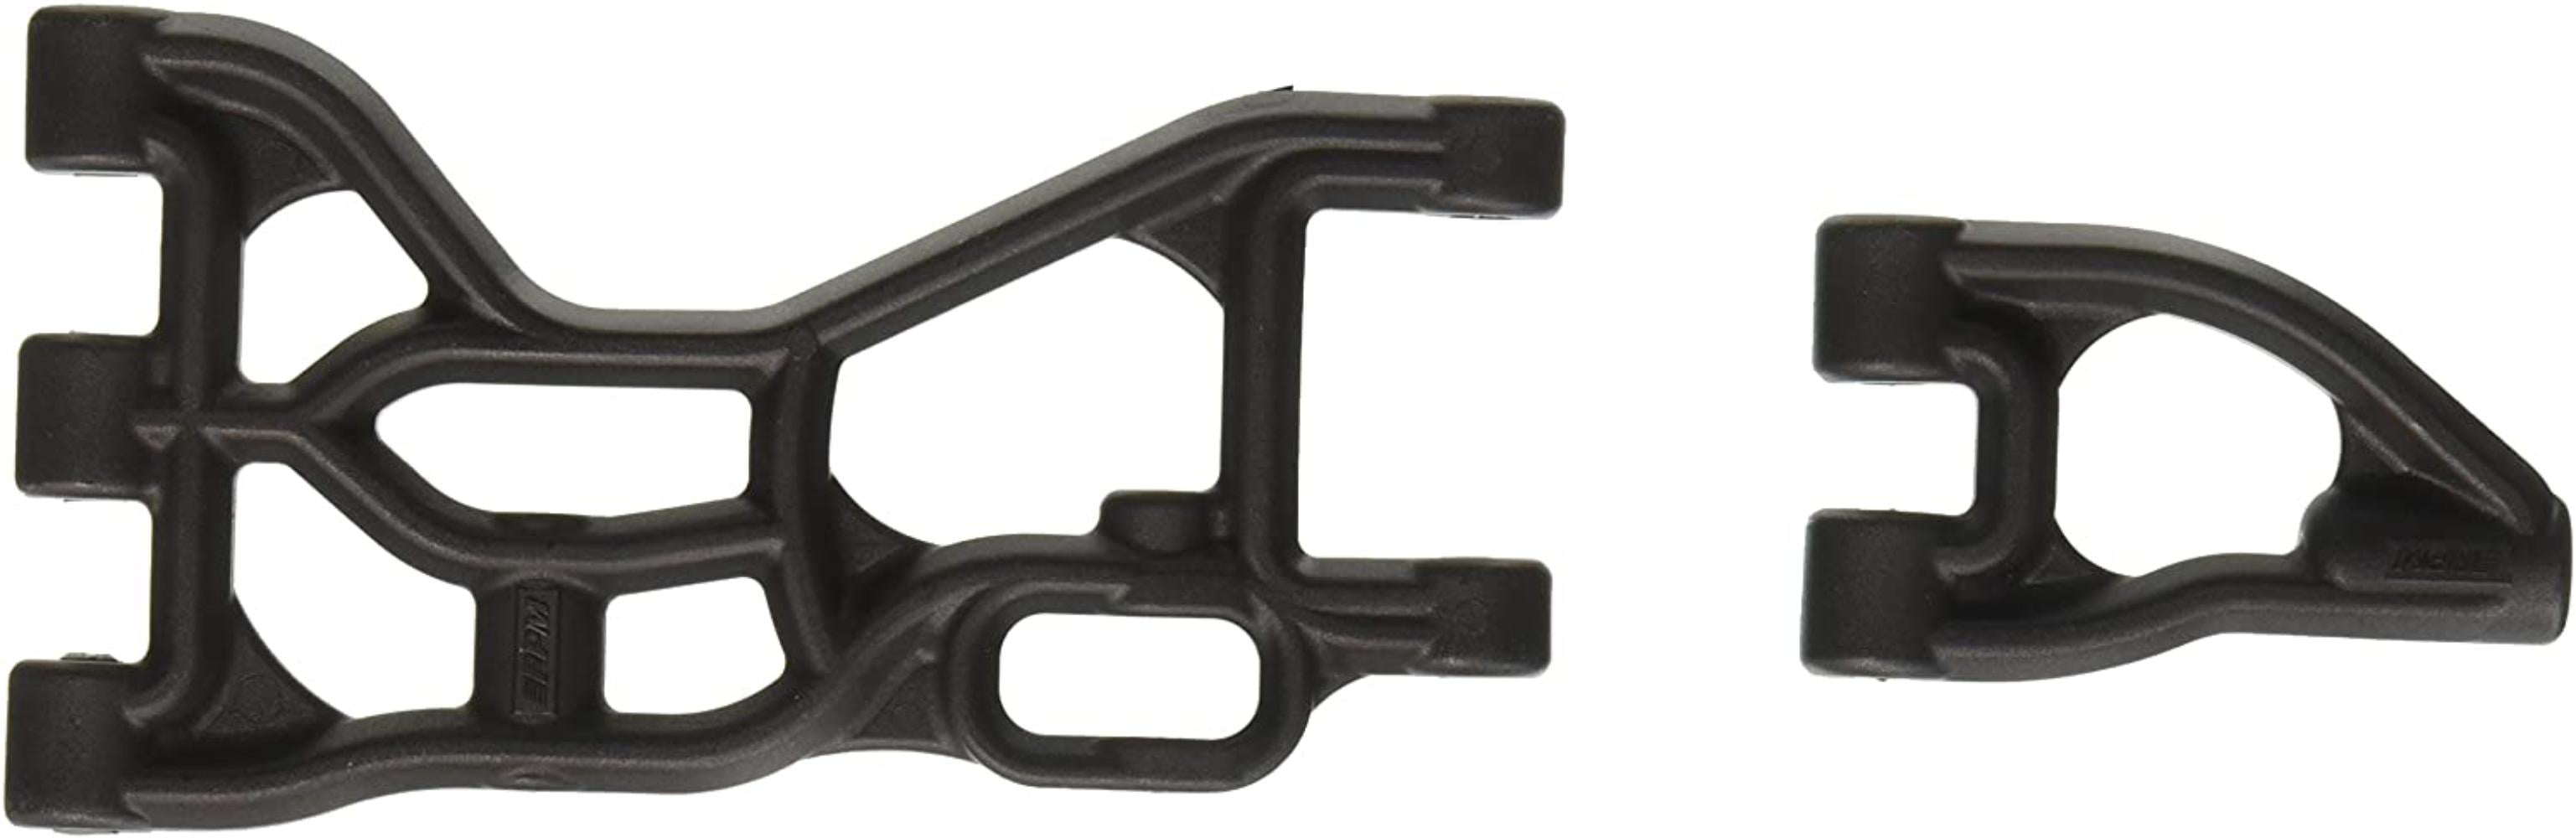 RPM R/C Products 82252 Rear Upper/Lower A-Arms Black HPI 5b/5t 